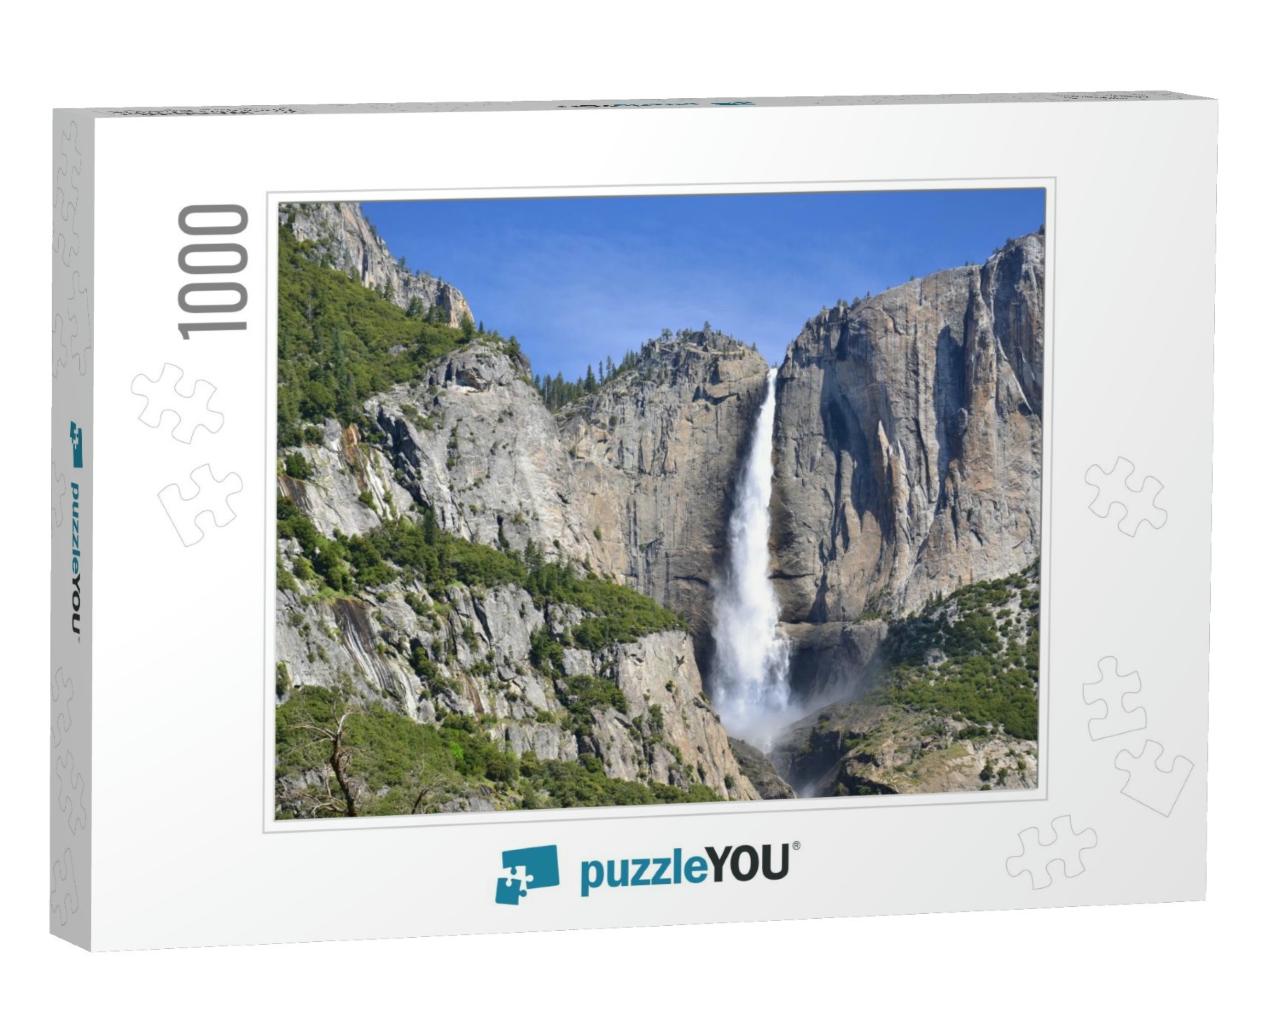 Yosemite Falls in Yosemite Valley, National Park... Jigsaw Puzzle with 1000 pieces